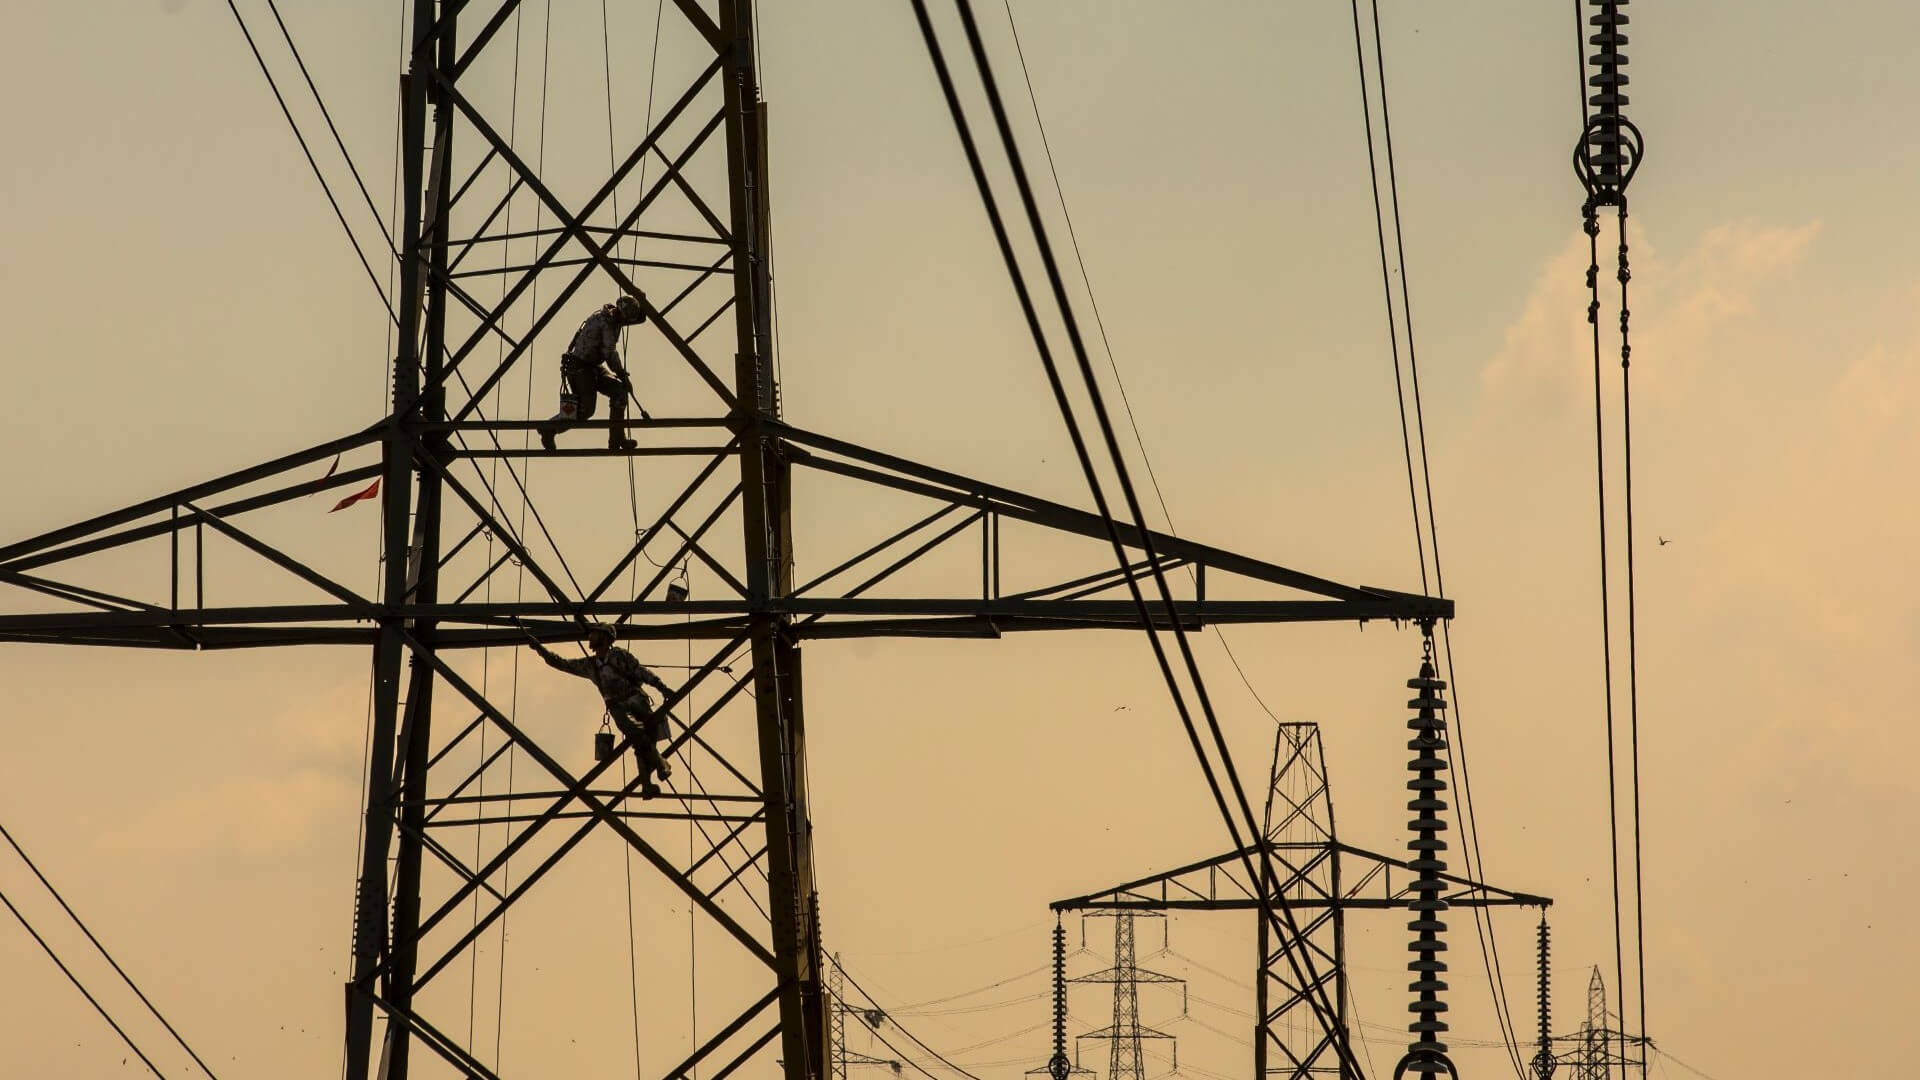 Row of pylons silhouetted against sunset, with two maintenance operators at top of first pylon